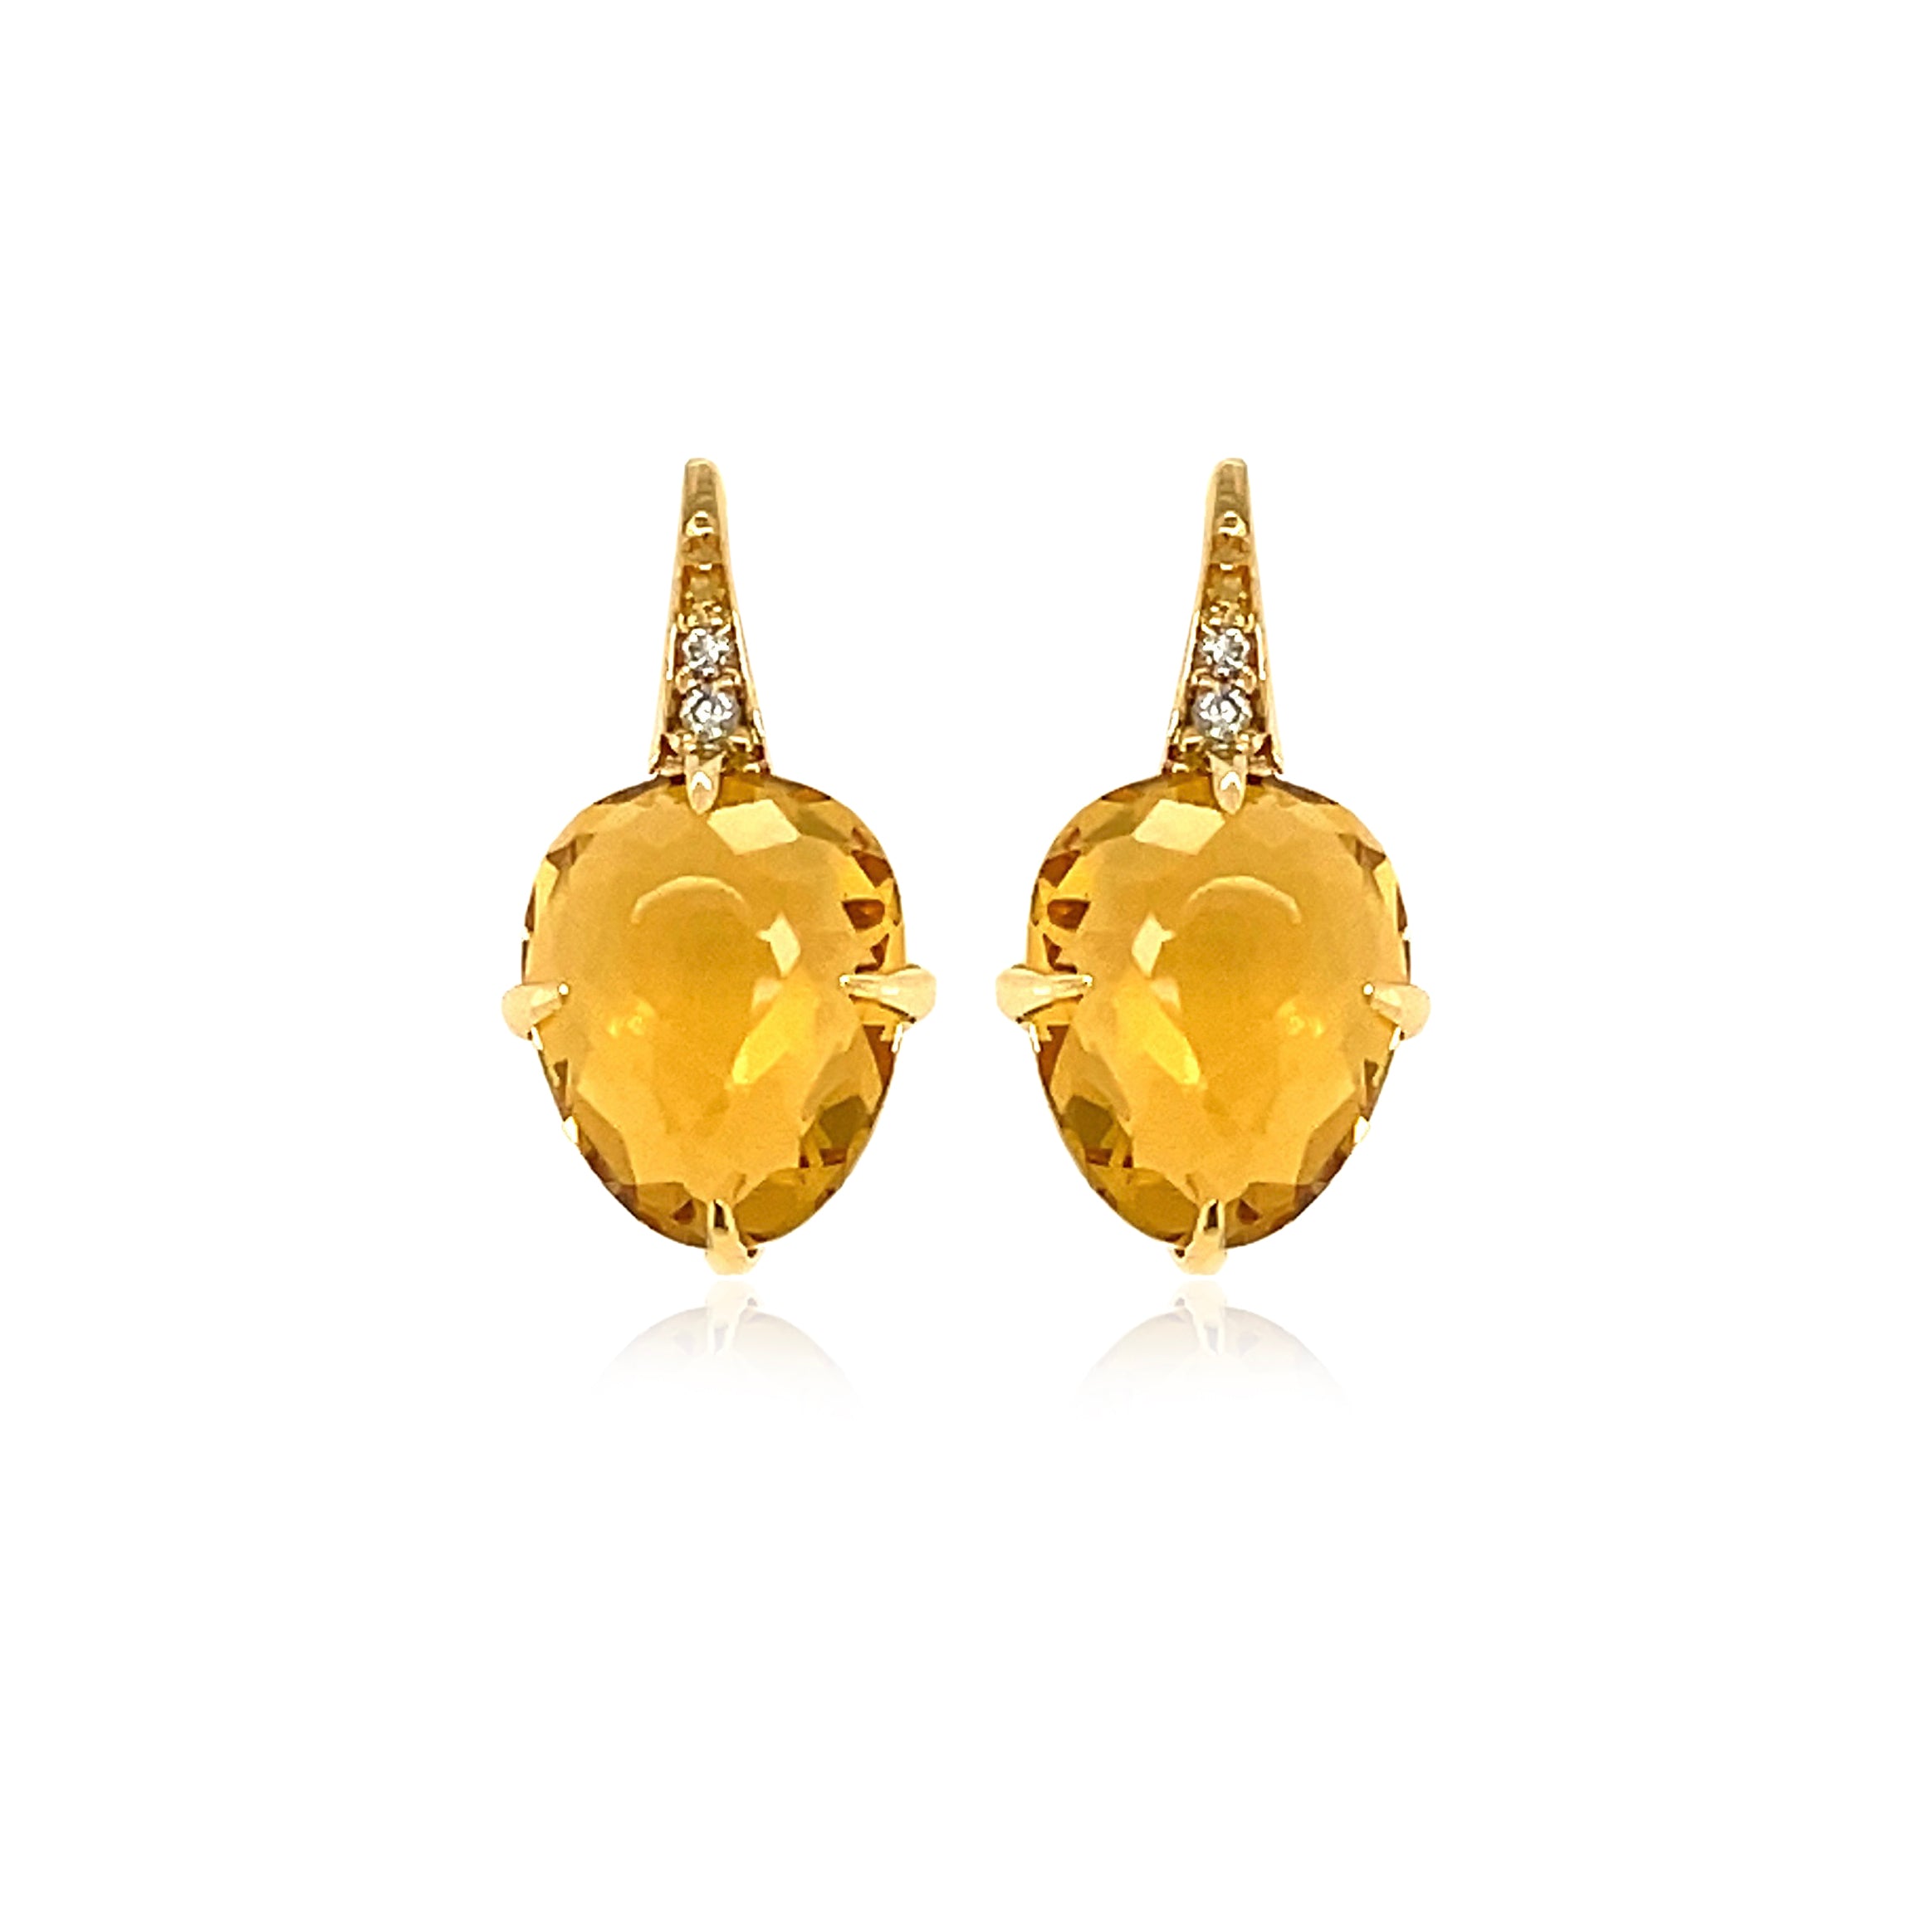 Sugar loaf collection made in Brazil  Tear shape faceted Citrine 6.23 cts  Round small diamonds 0.03 cts  Set in 18k yellow gold  Secure hinged system  18.00 mm.